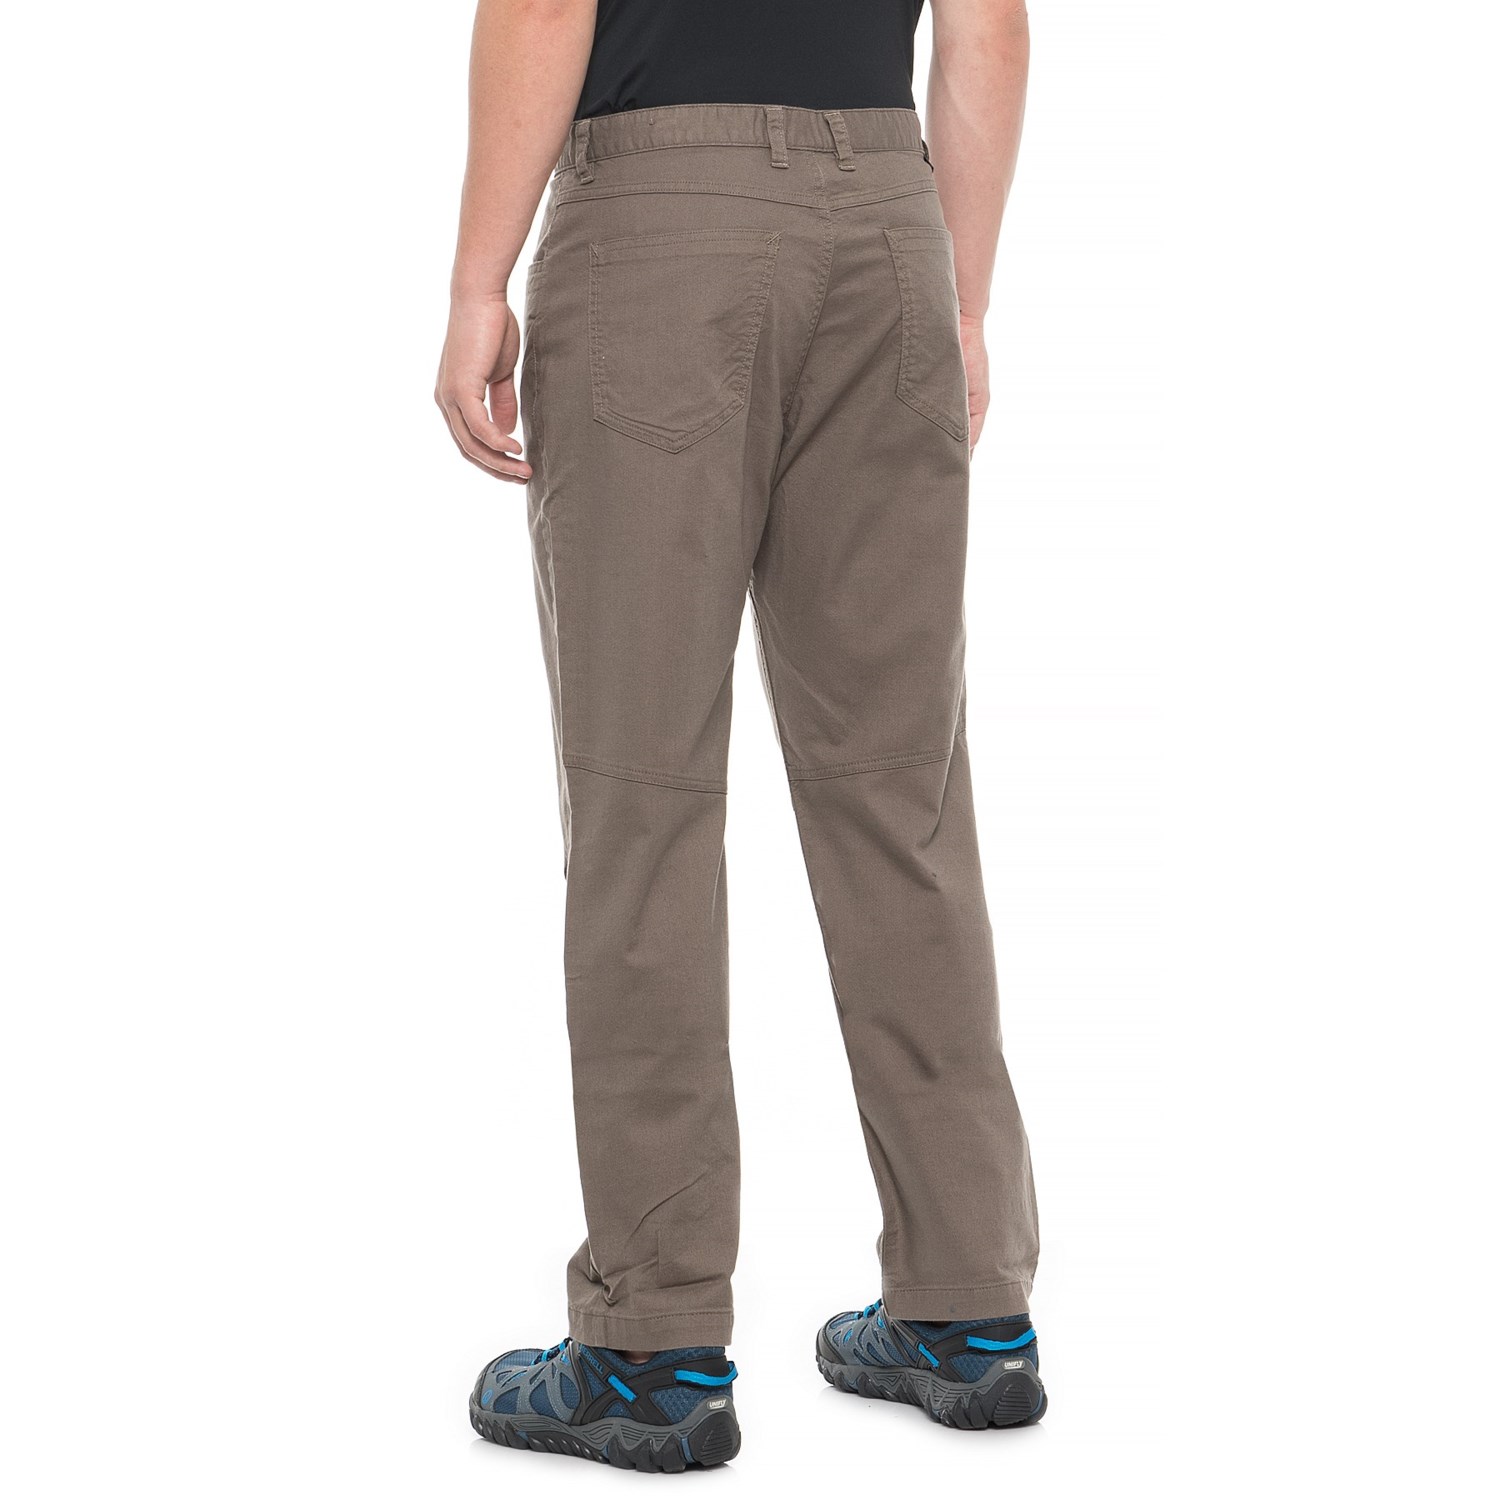 north face motion pants